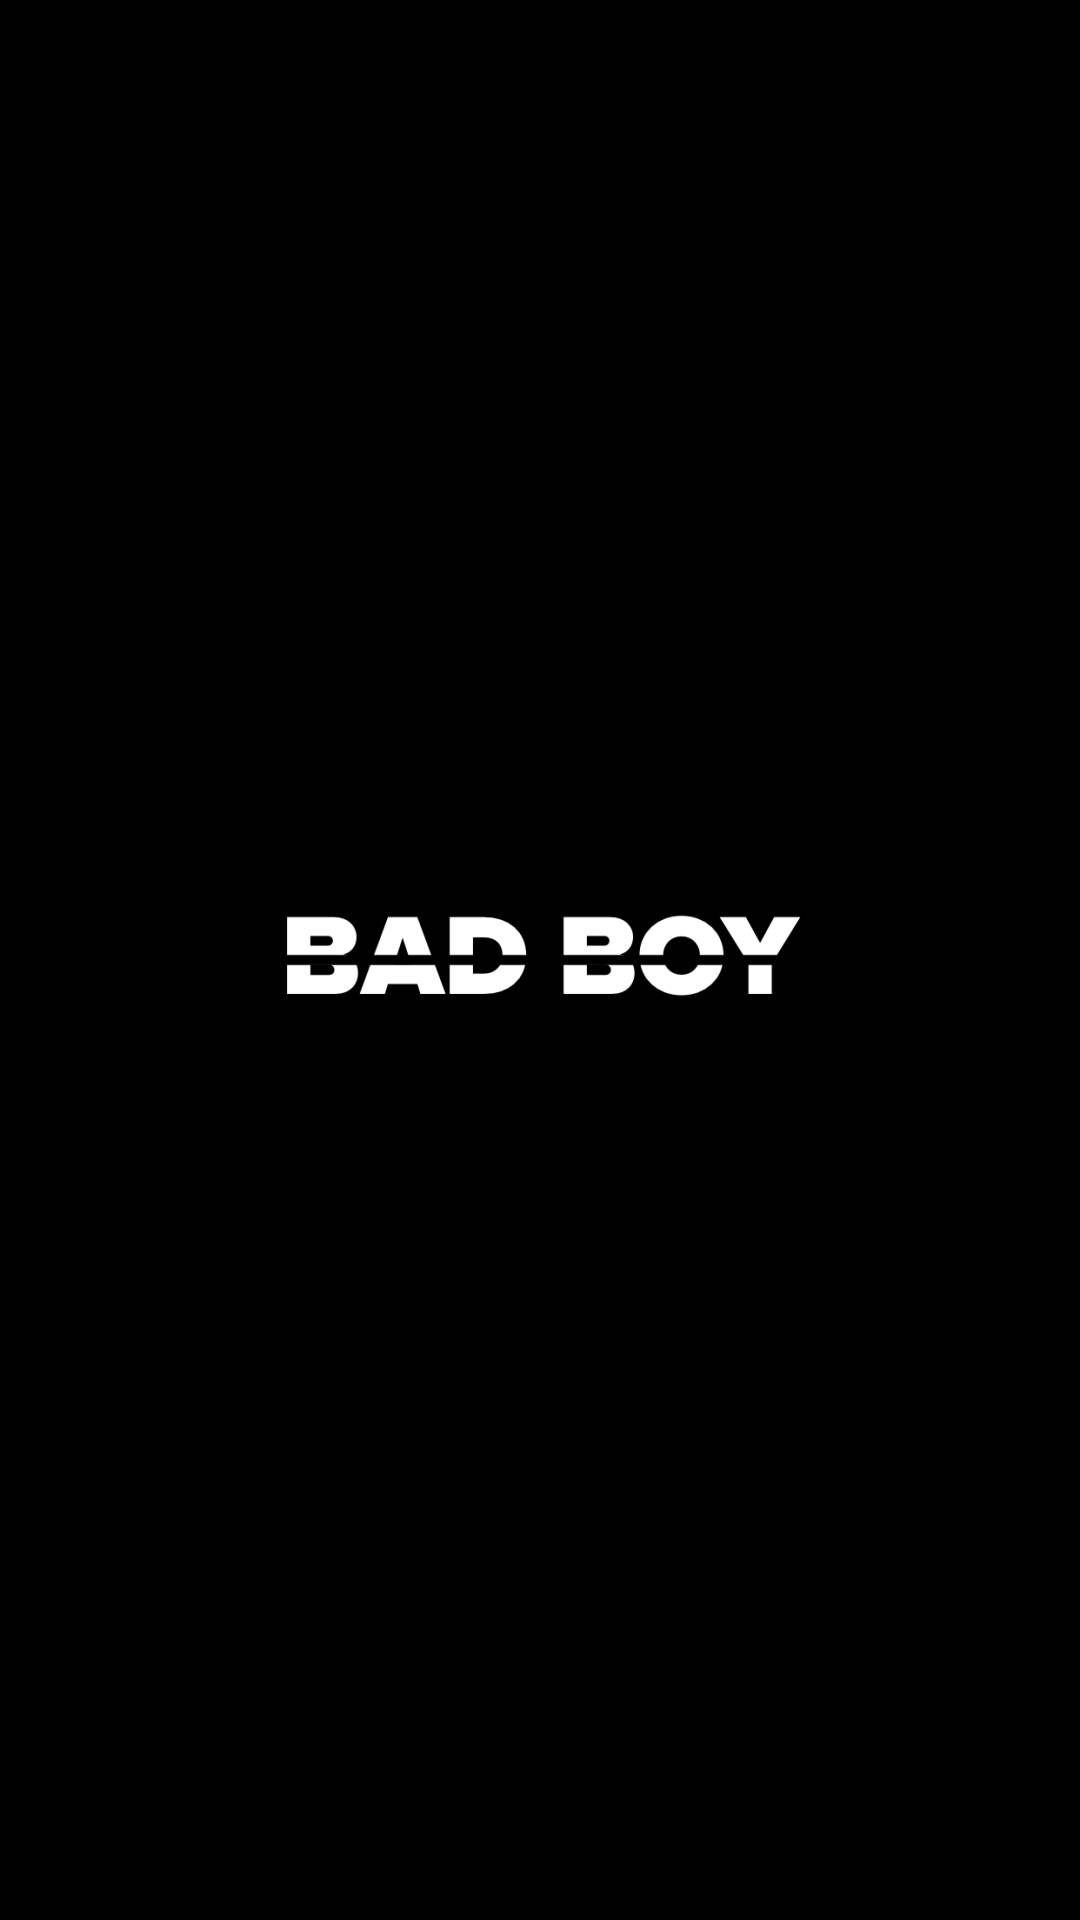 Free Bad Boy Wallpaper Downloads, [100+] Bad Boy Wallpapers for FREE |  